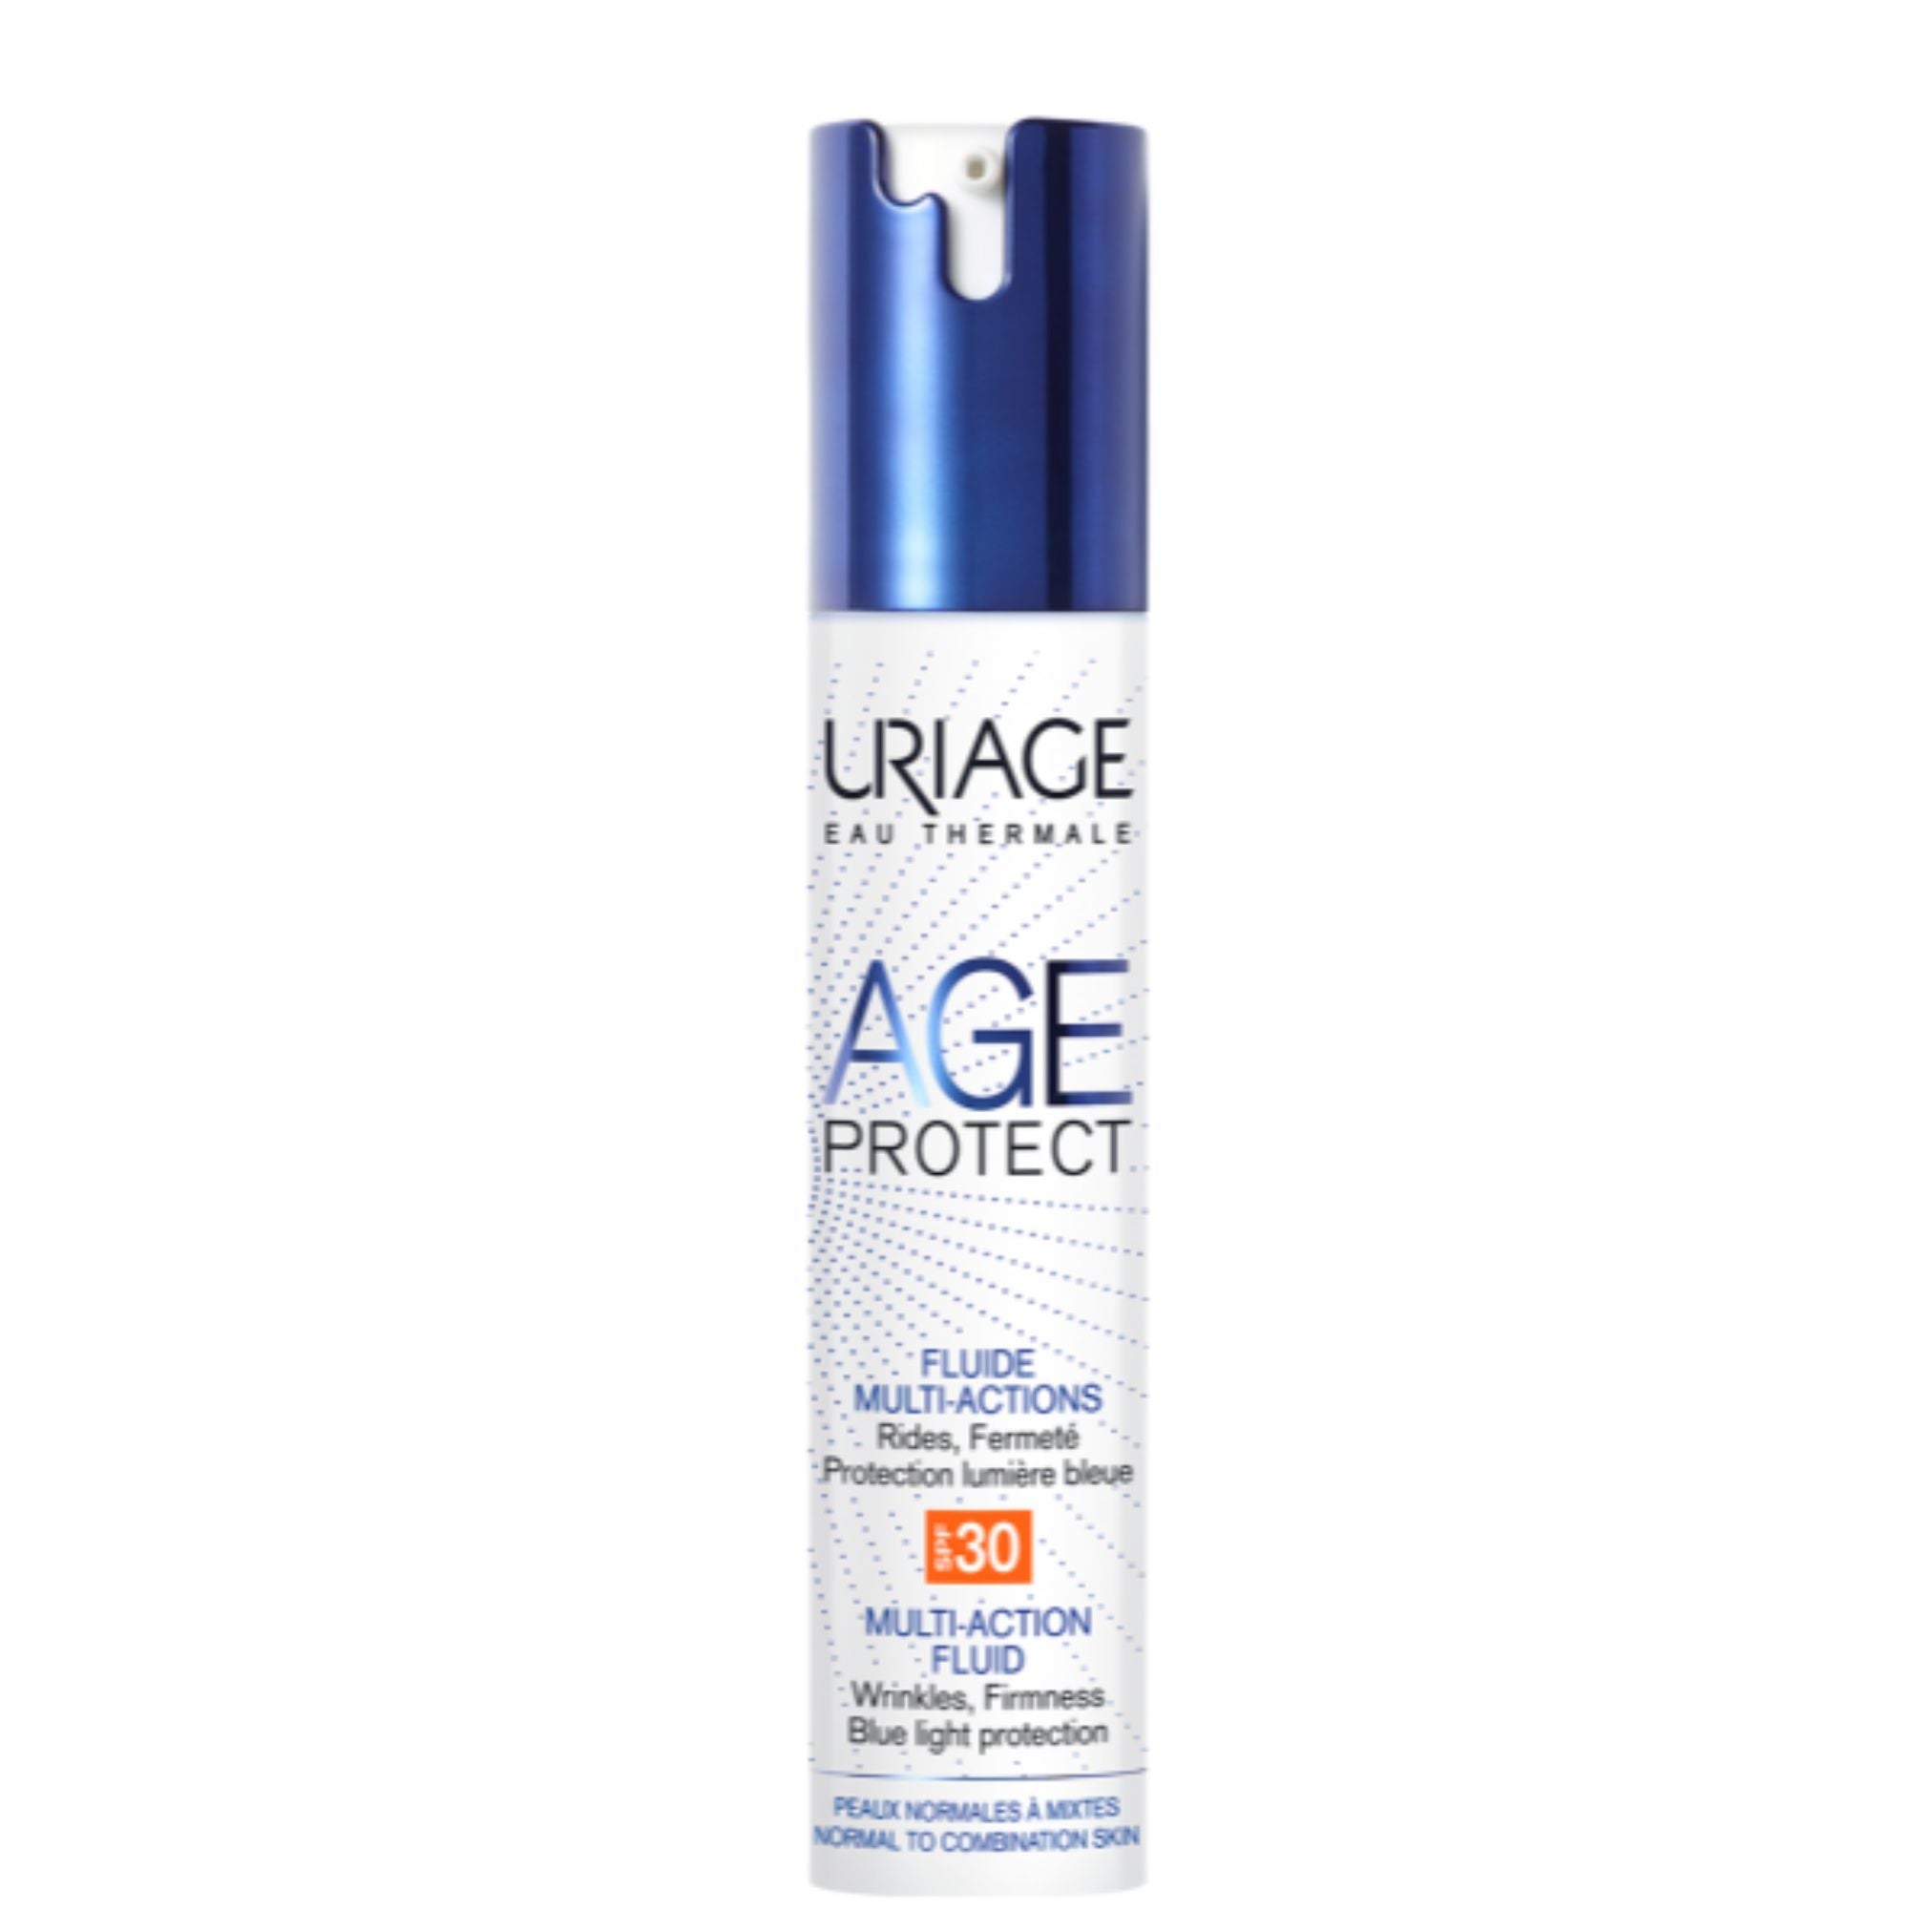 Uriage Age Protect Multi-Action Fluid 40ml